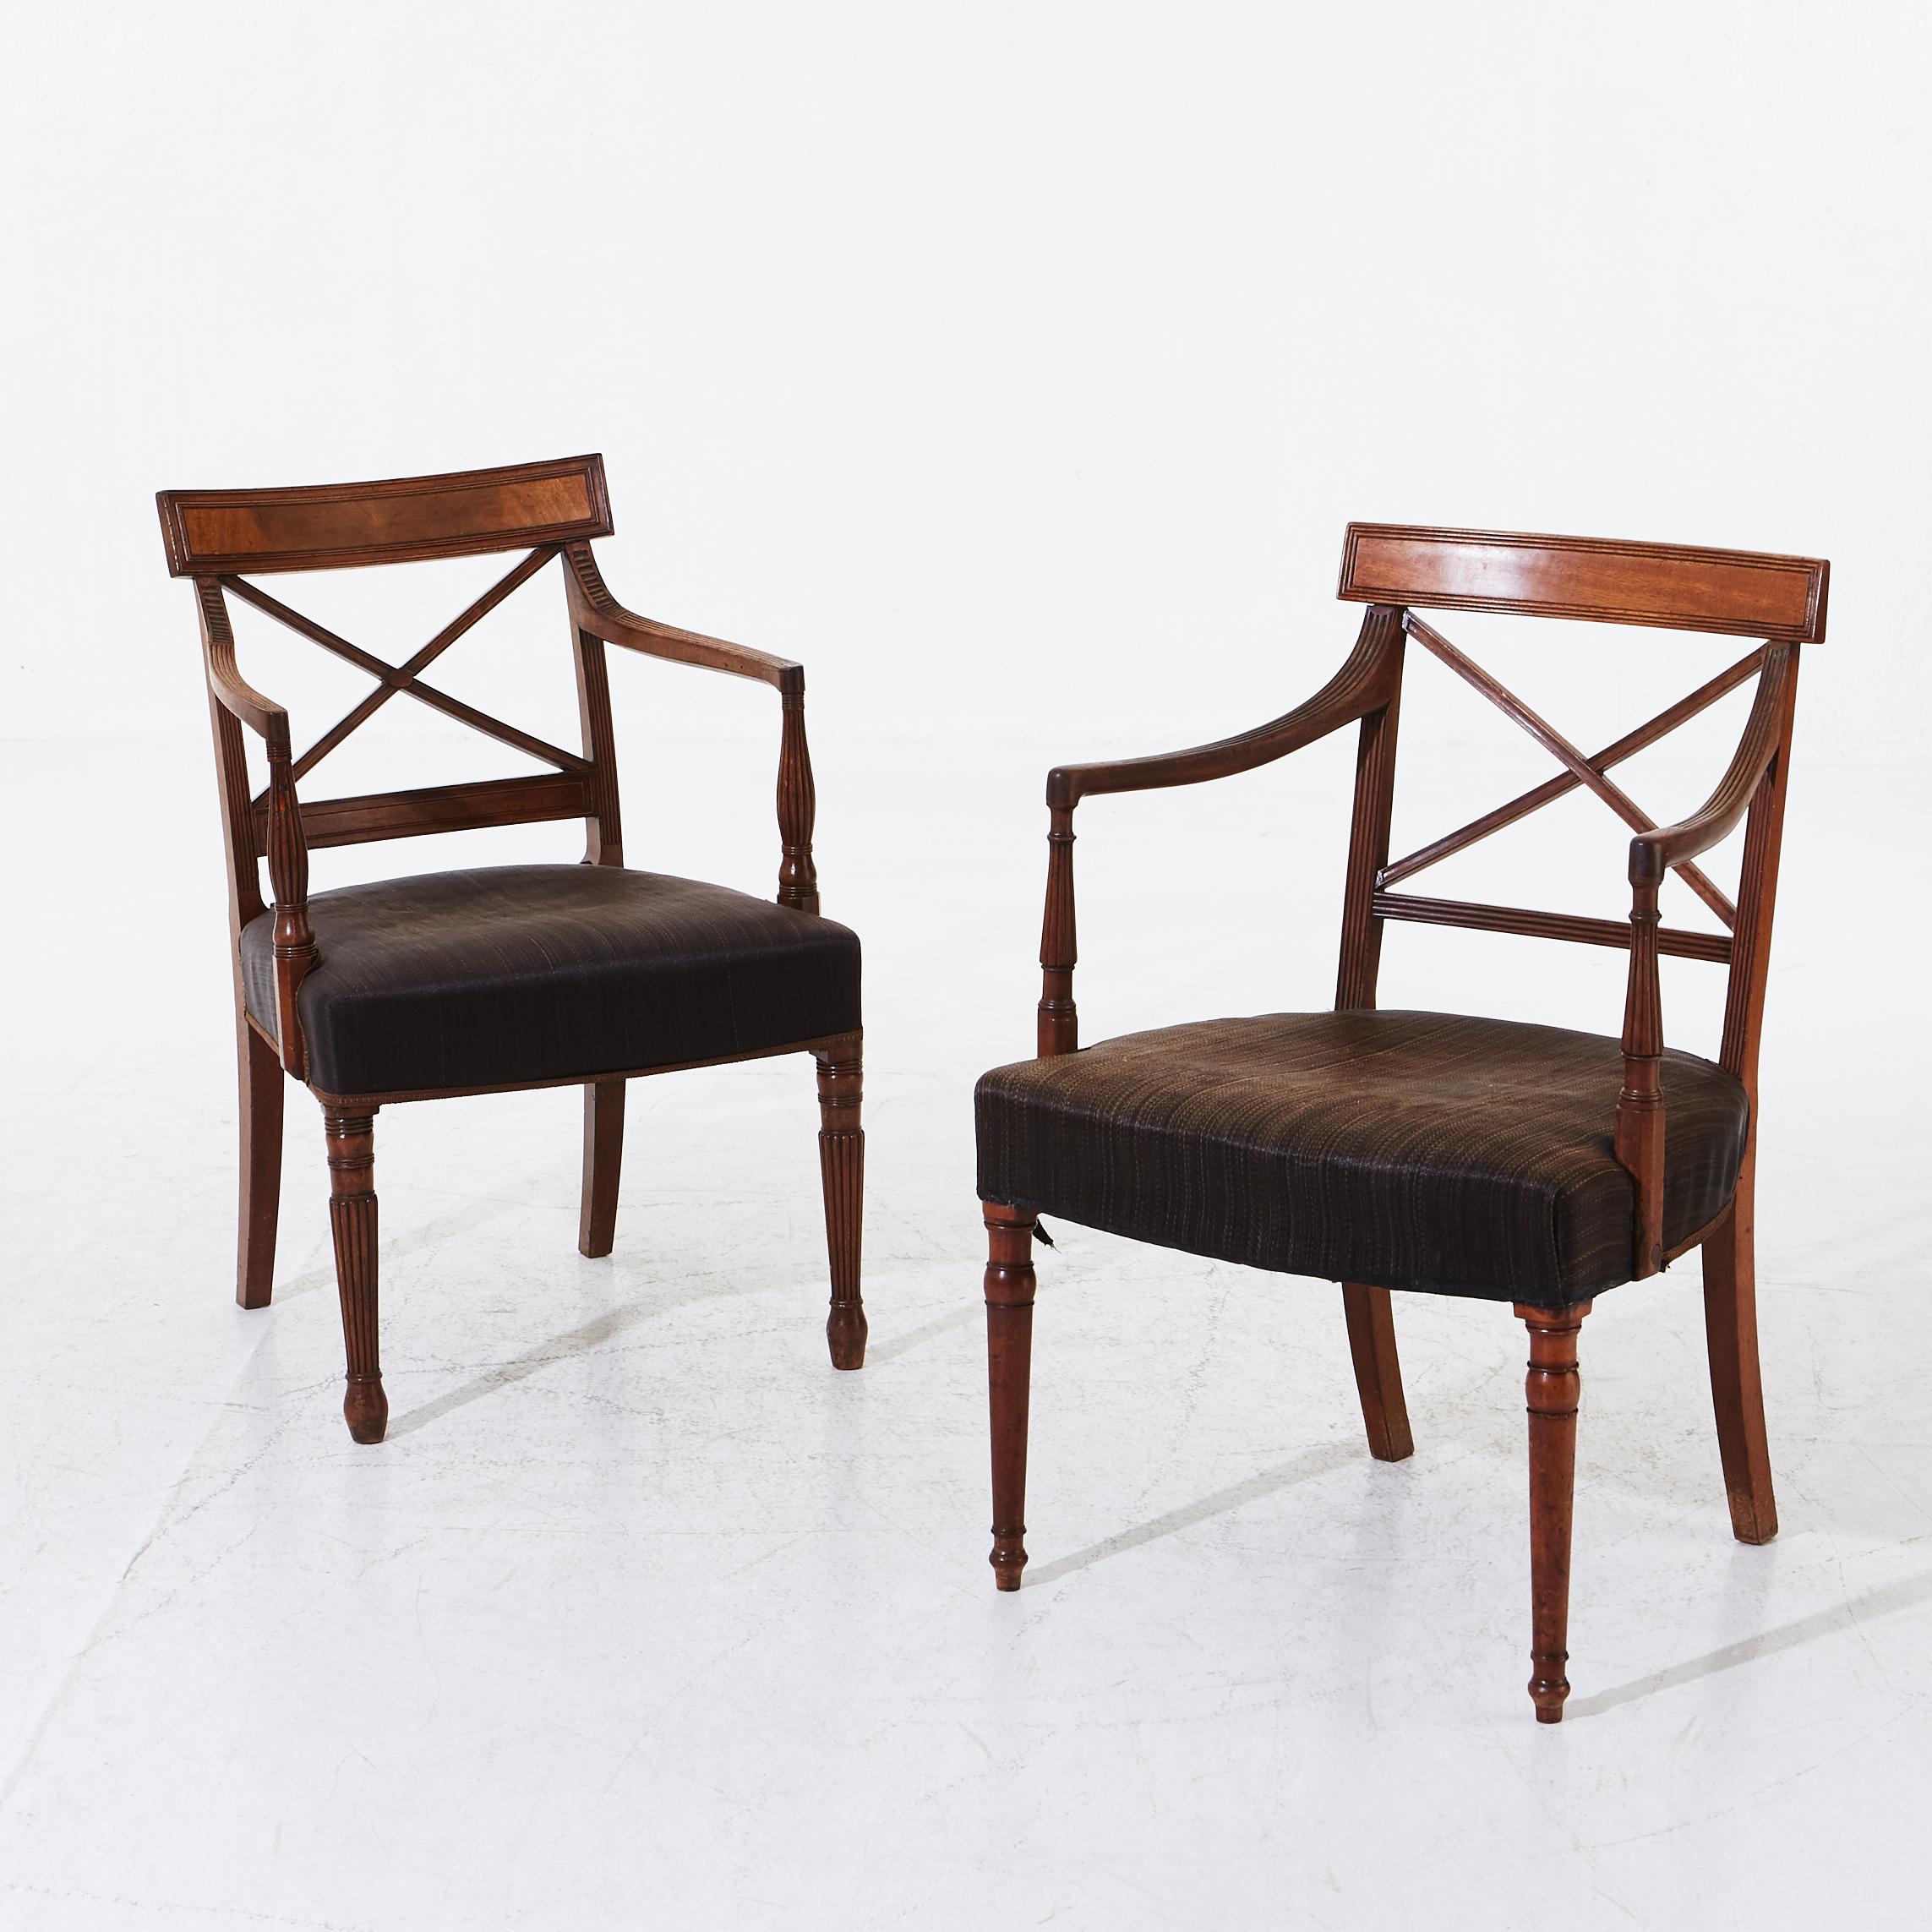 19th Century Pair of Regency Mahogany Arm Chairs, with Original Horsehair Upholstery